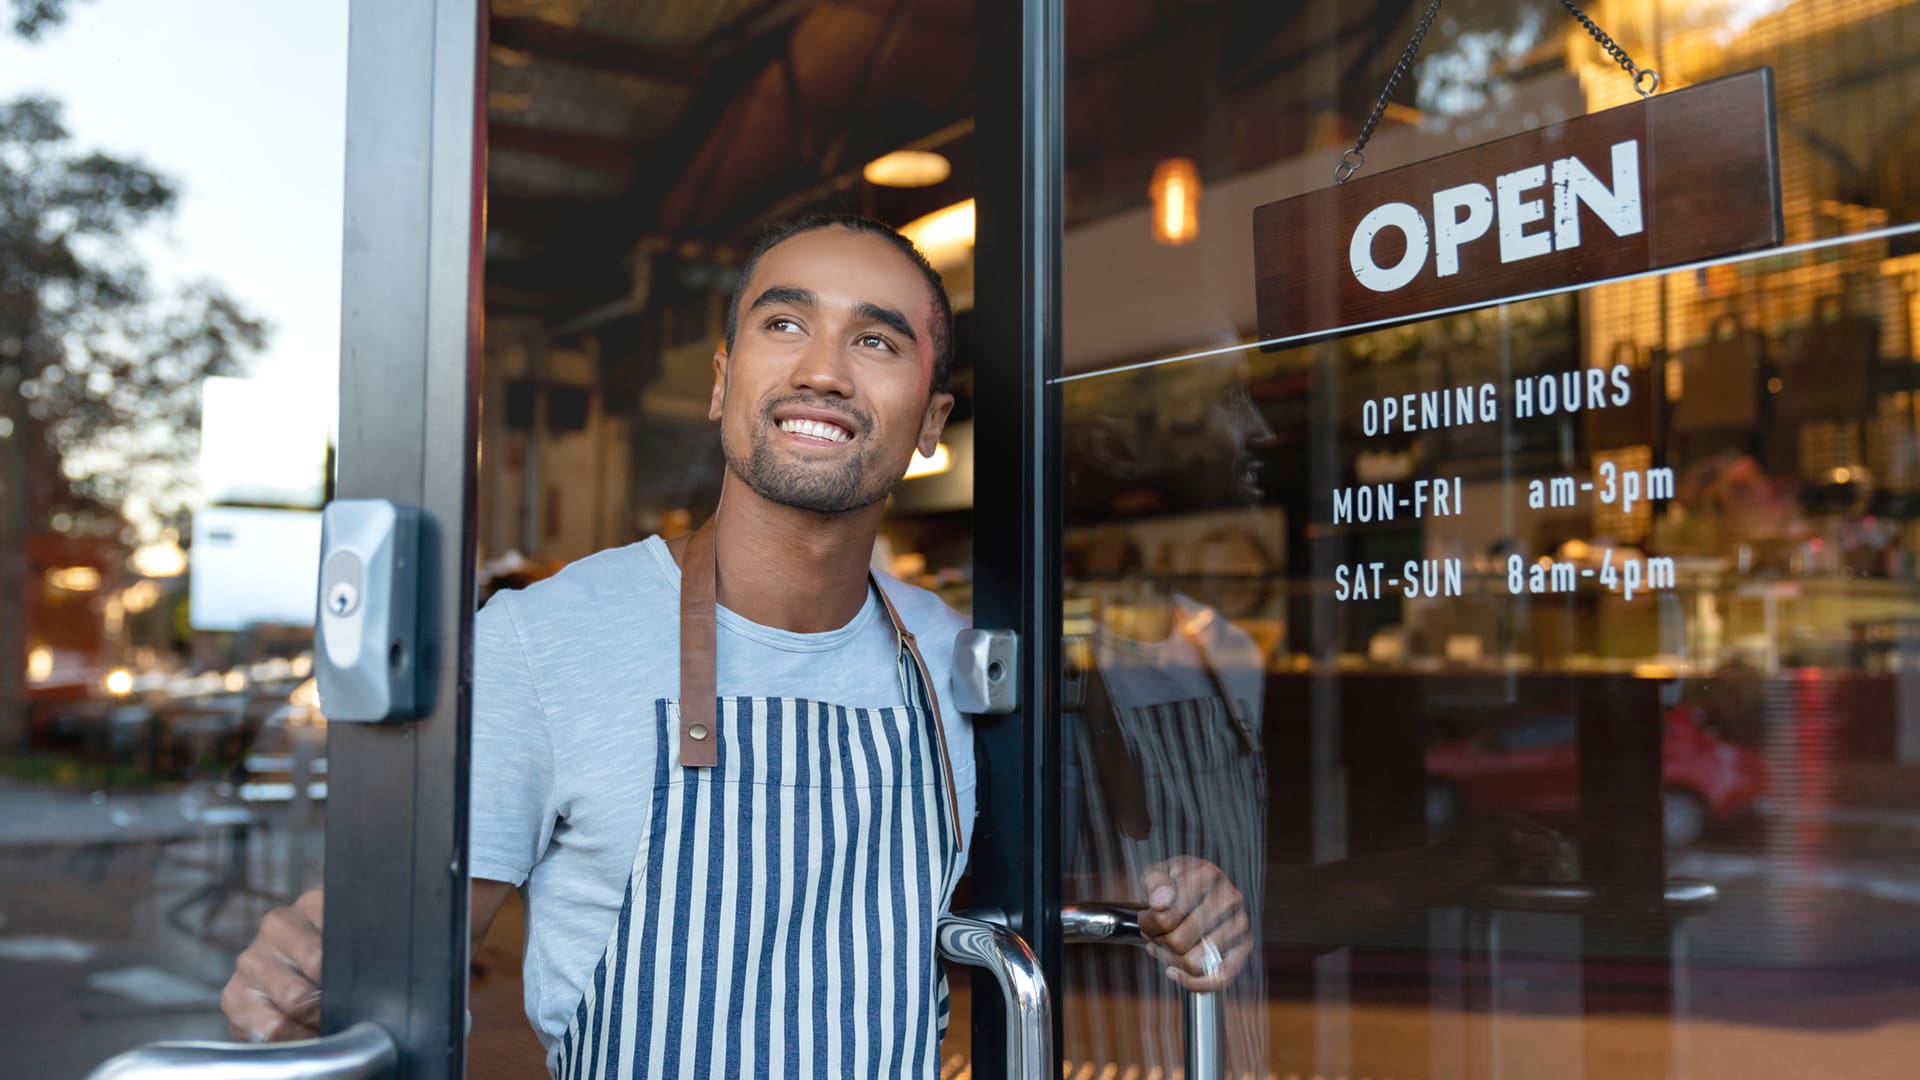 A business owner opens the door of his shop